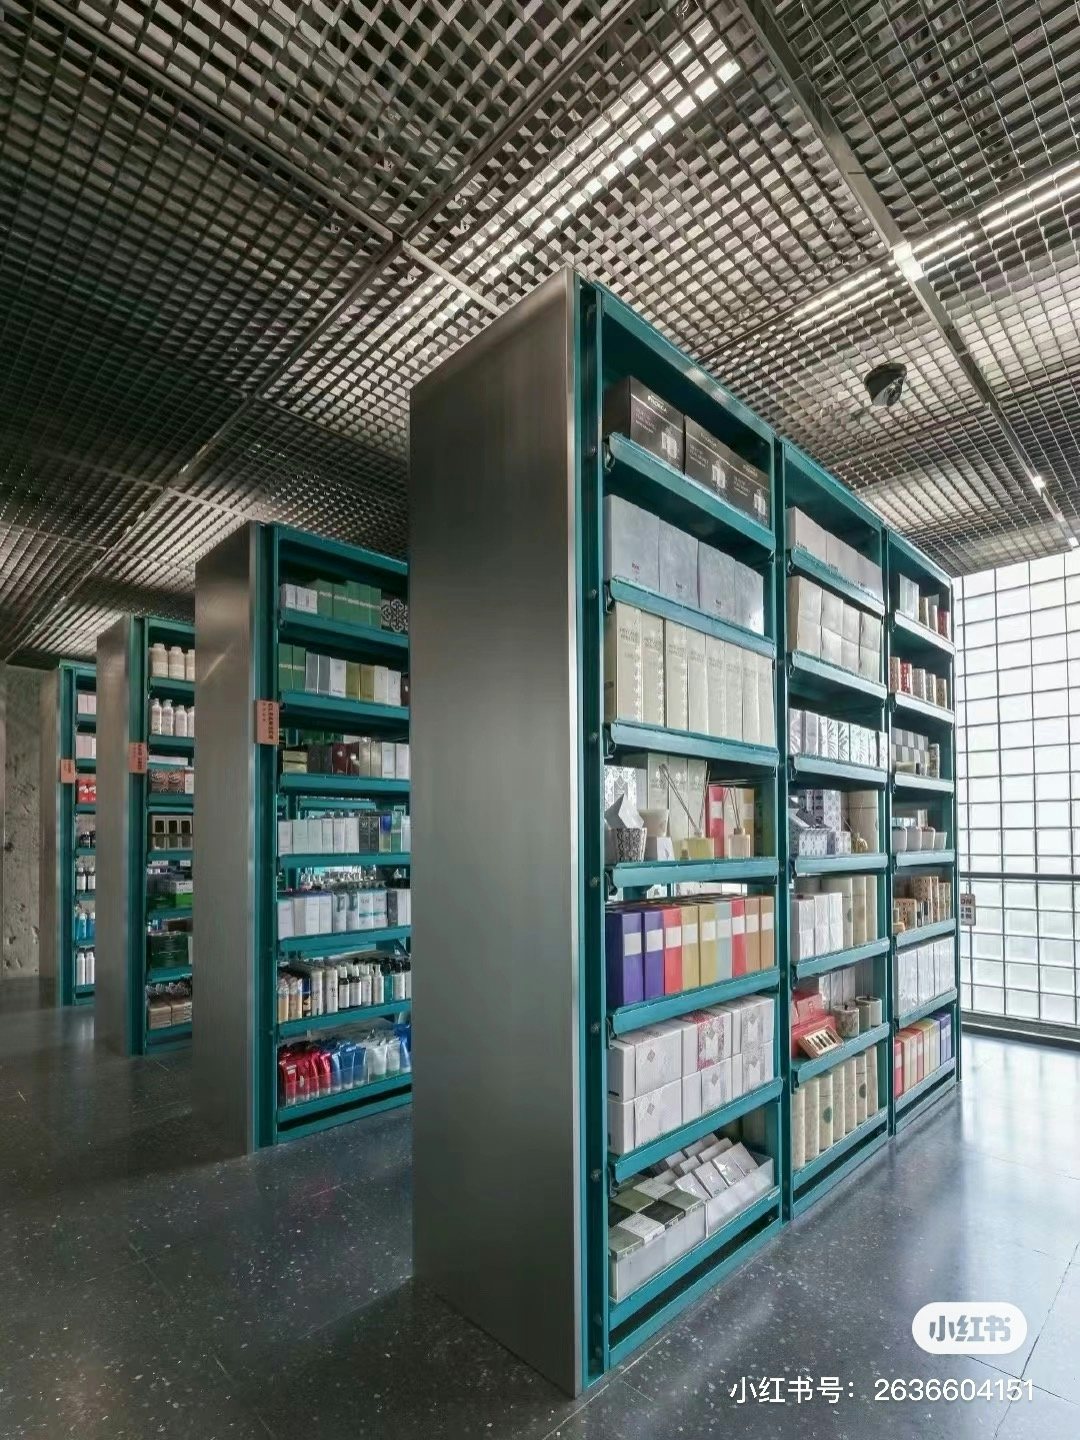 Giant shelves of beauty products at the local multibrand beauty store Harmay. Image: xiaohongshu